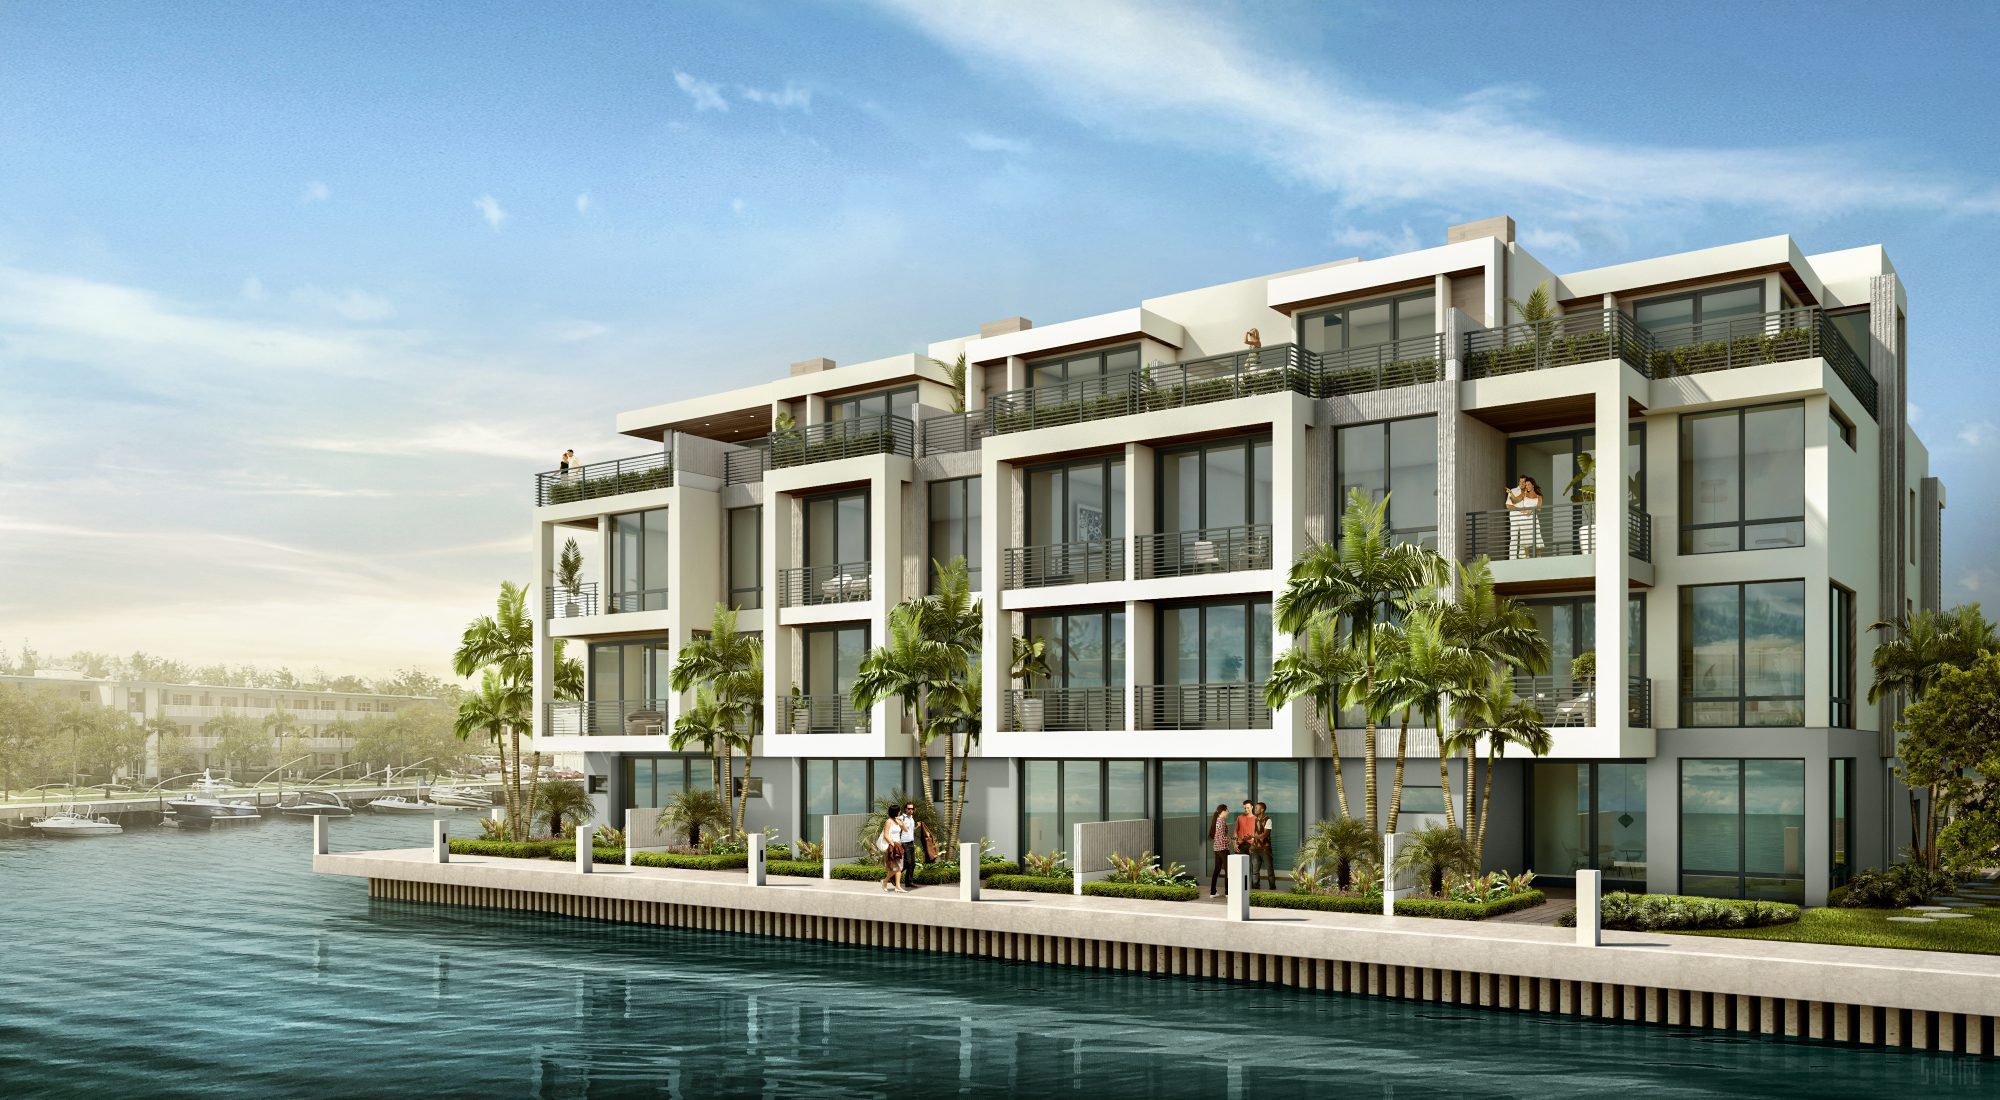 Koya Bay Water Angle View Rendering of a building with people standing outside by the water's edge